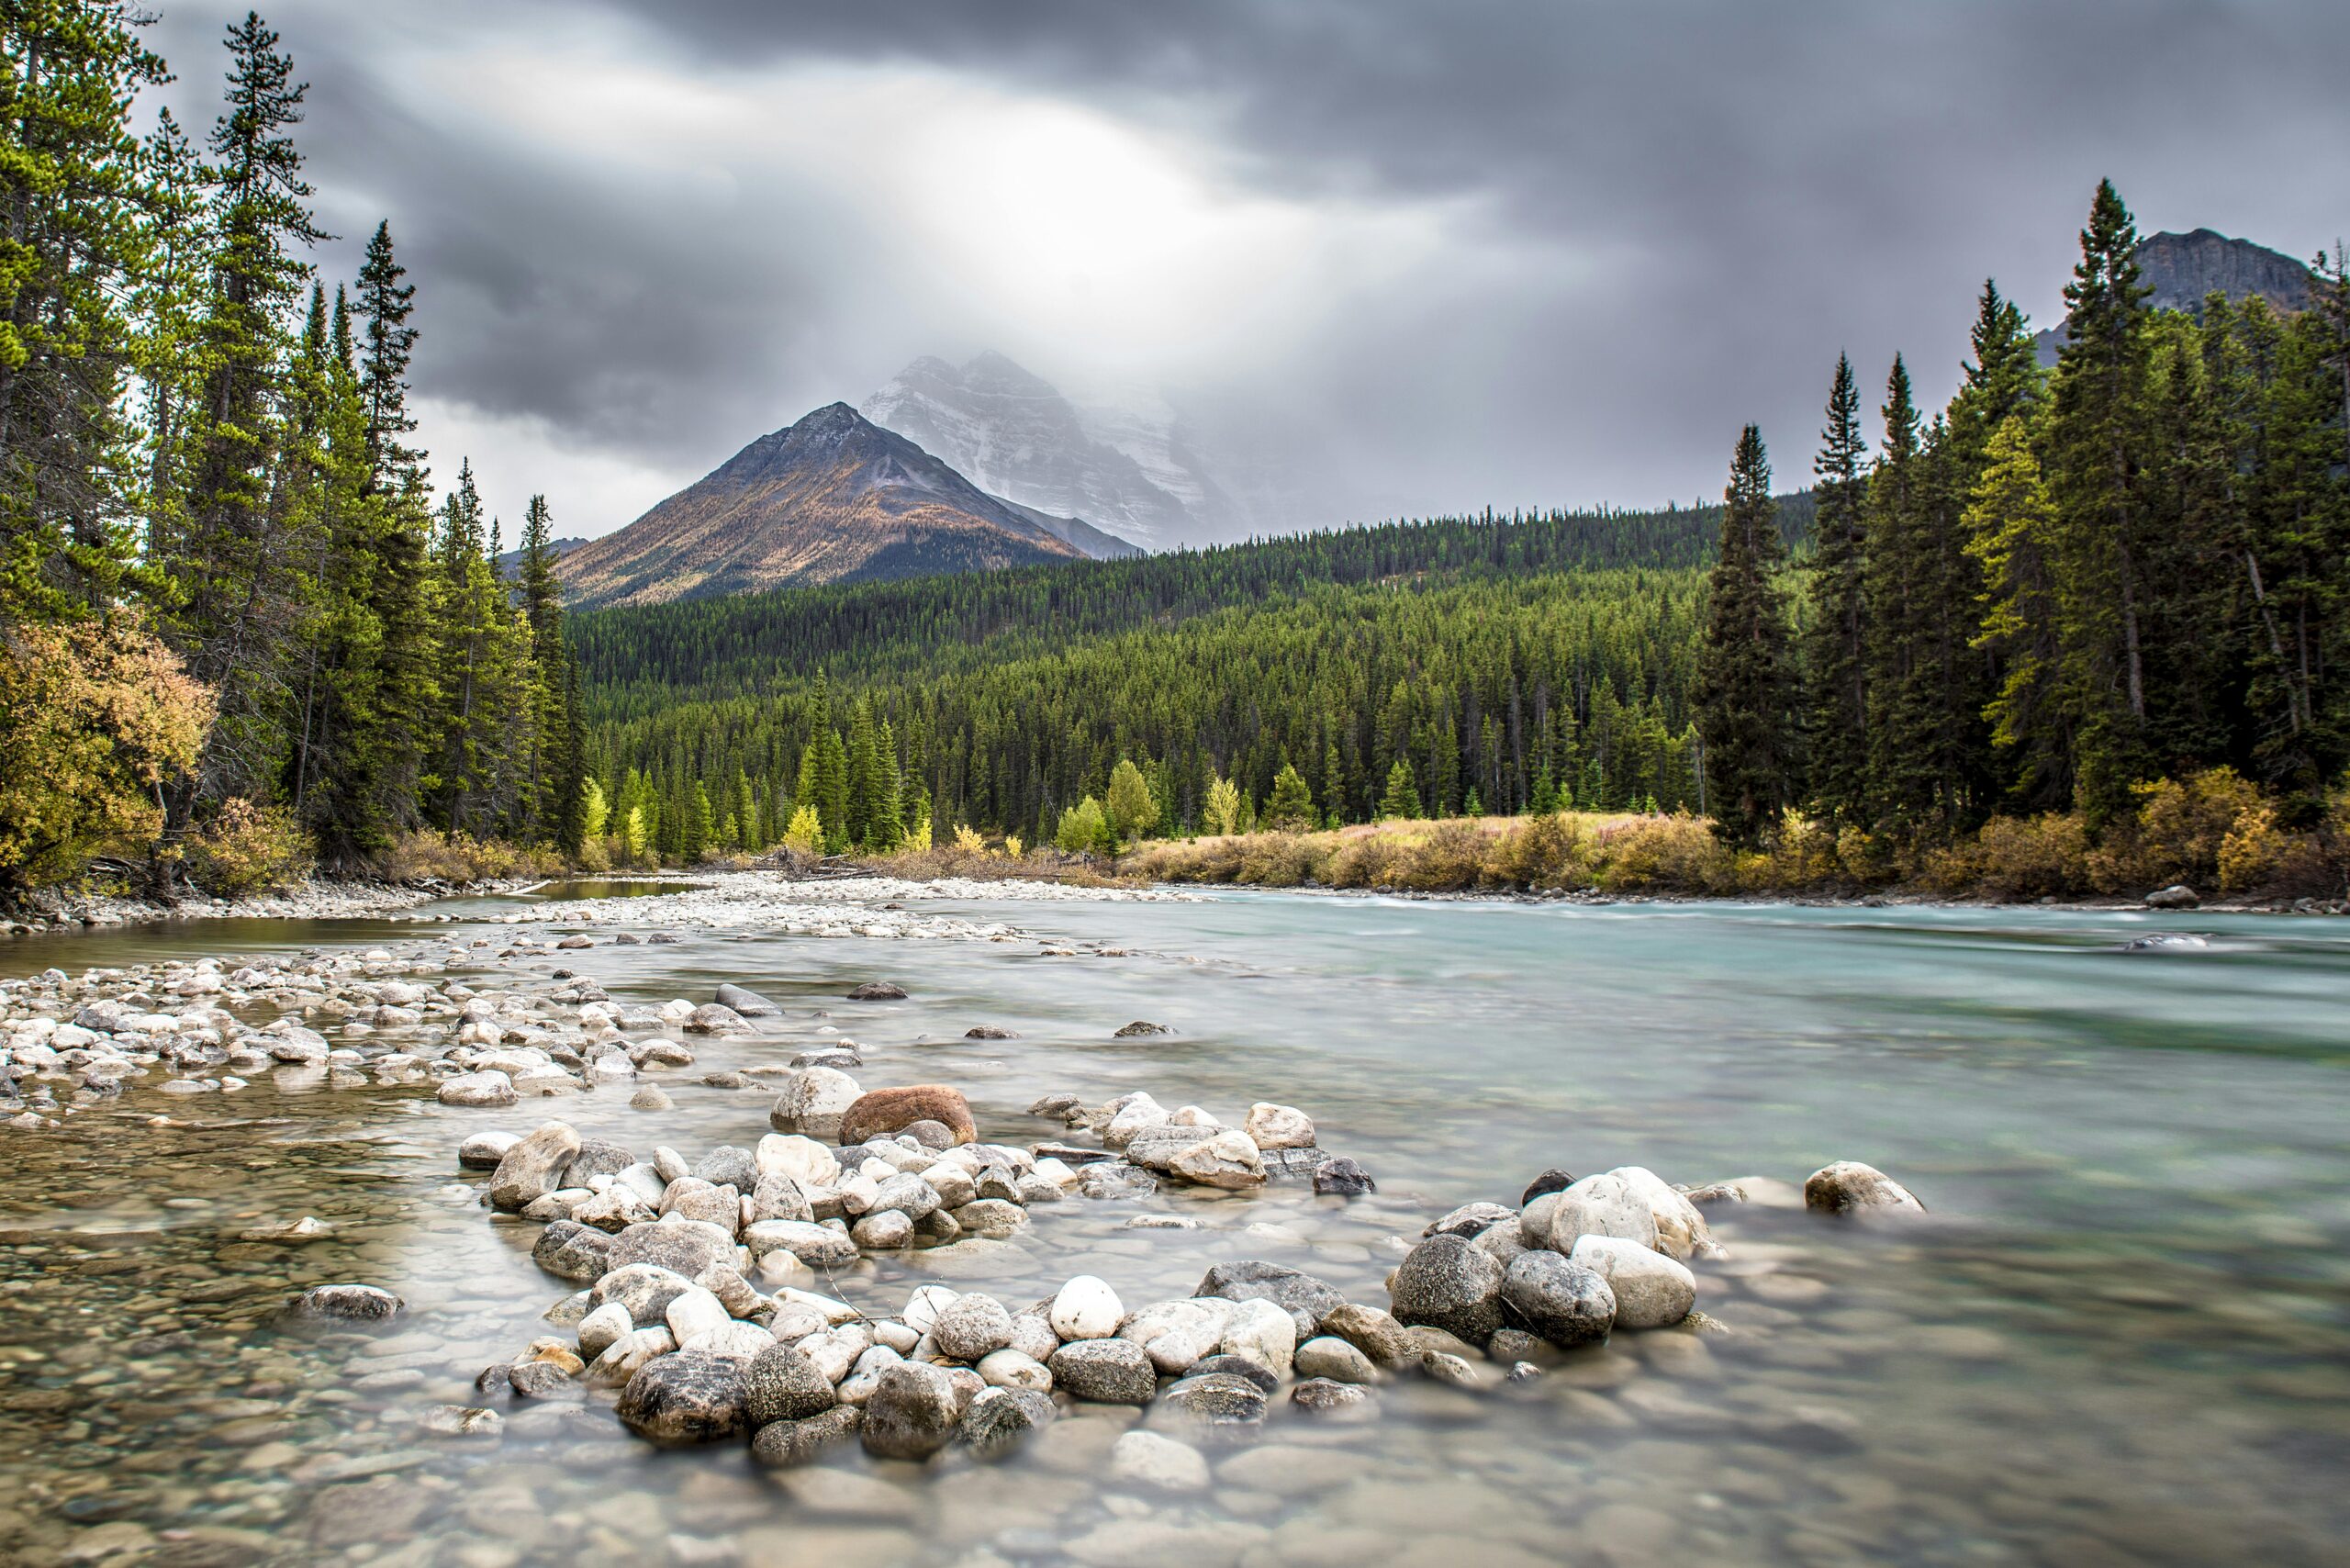 Stream and mountain scenery in Canada.